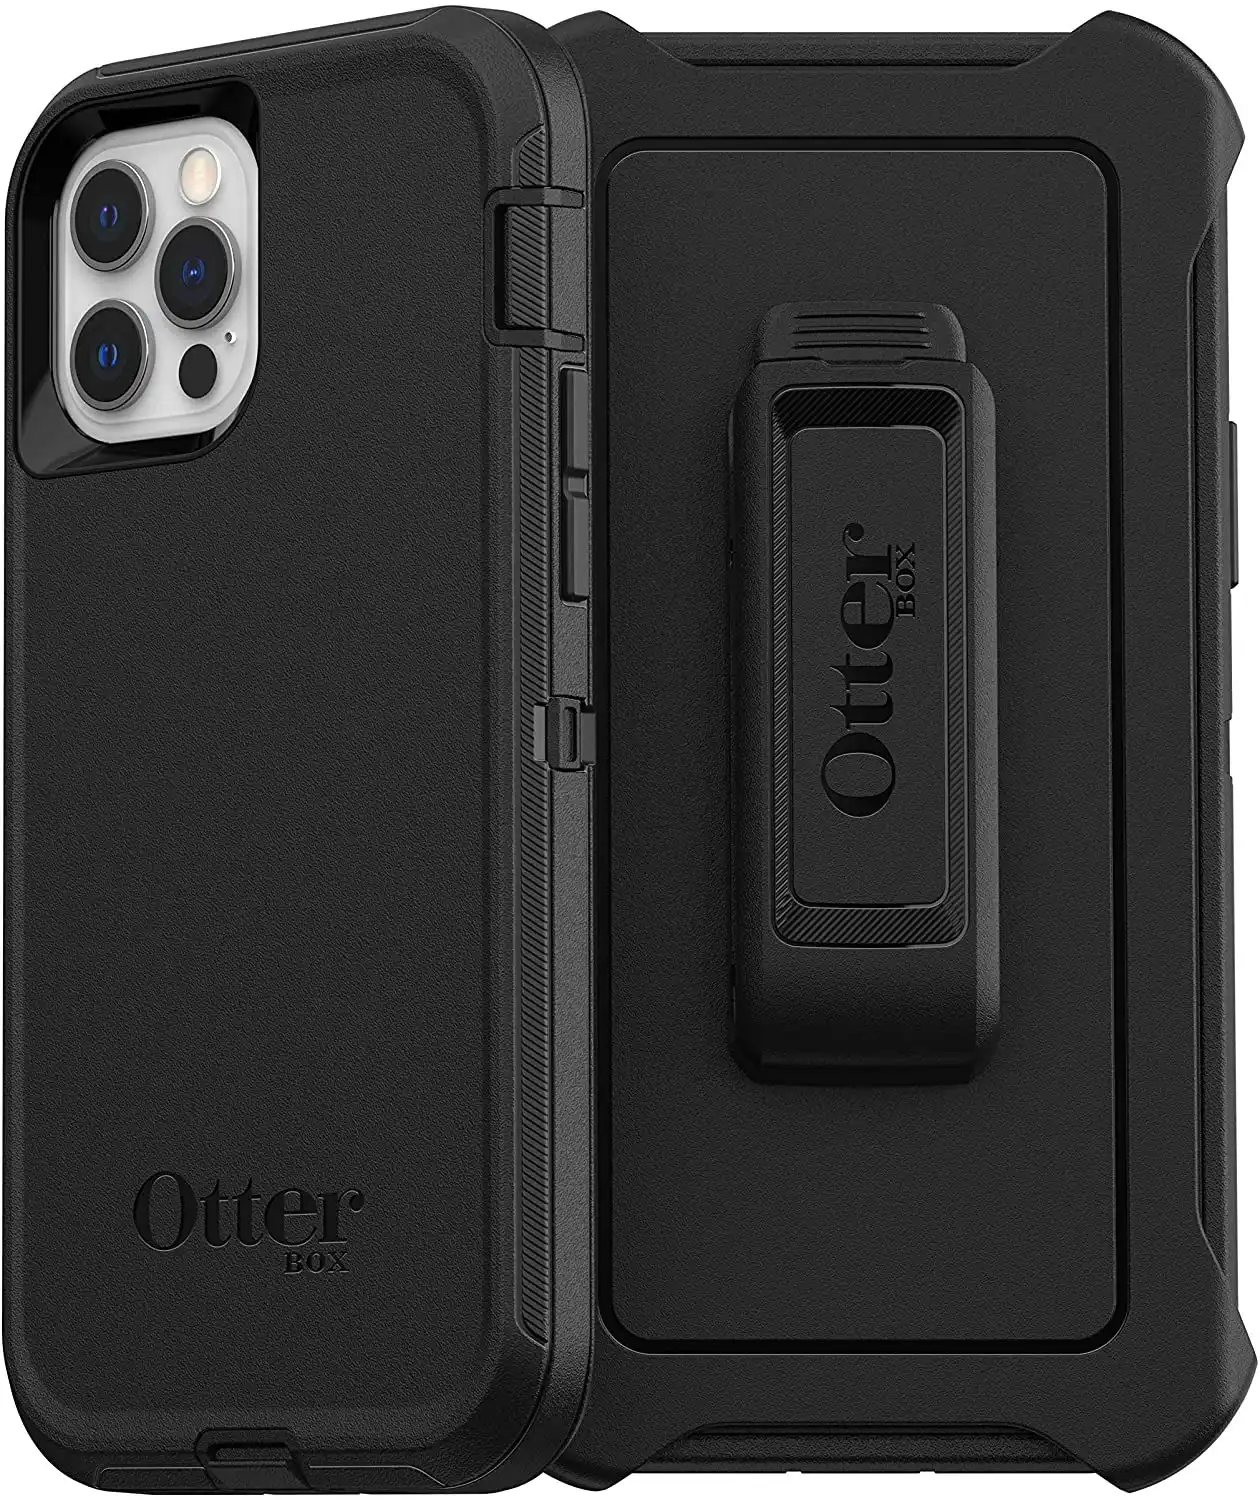 Otterbox Defender Series Case For Apple Iphone 12/12 Pro - Black